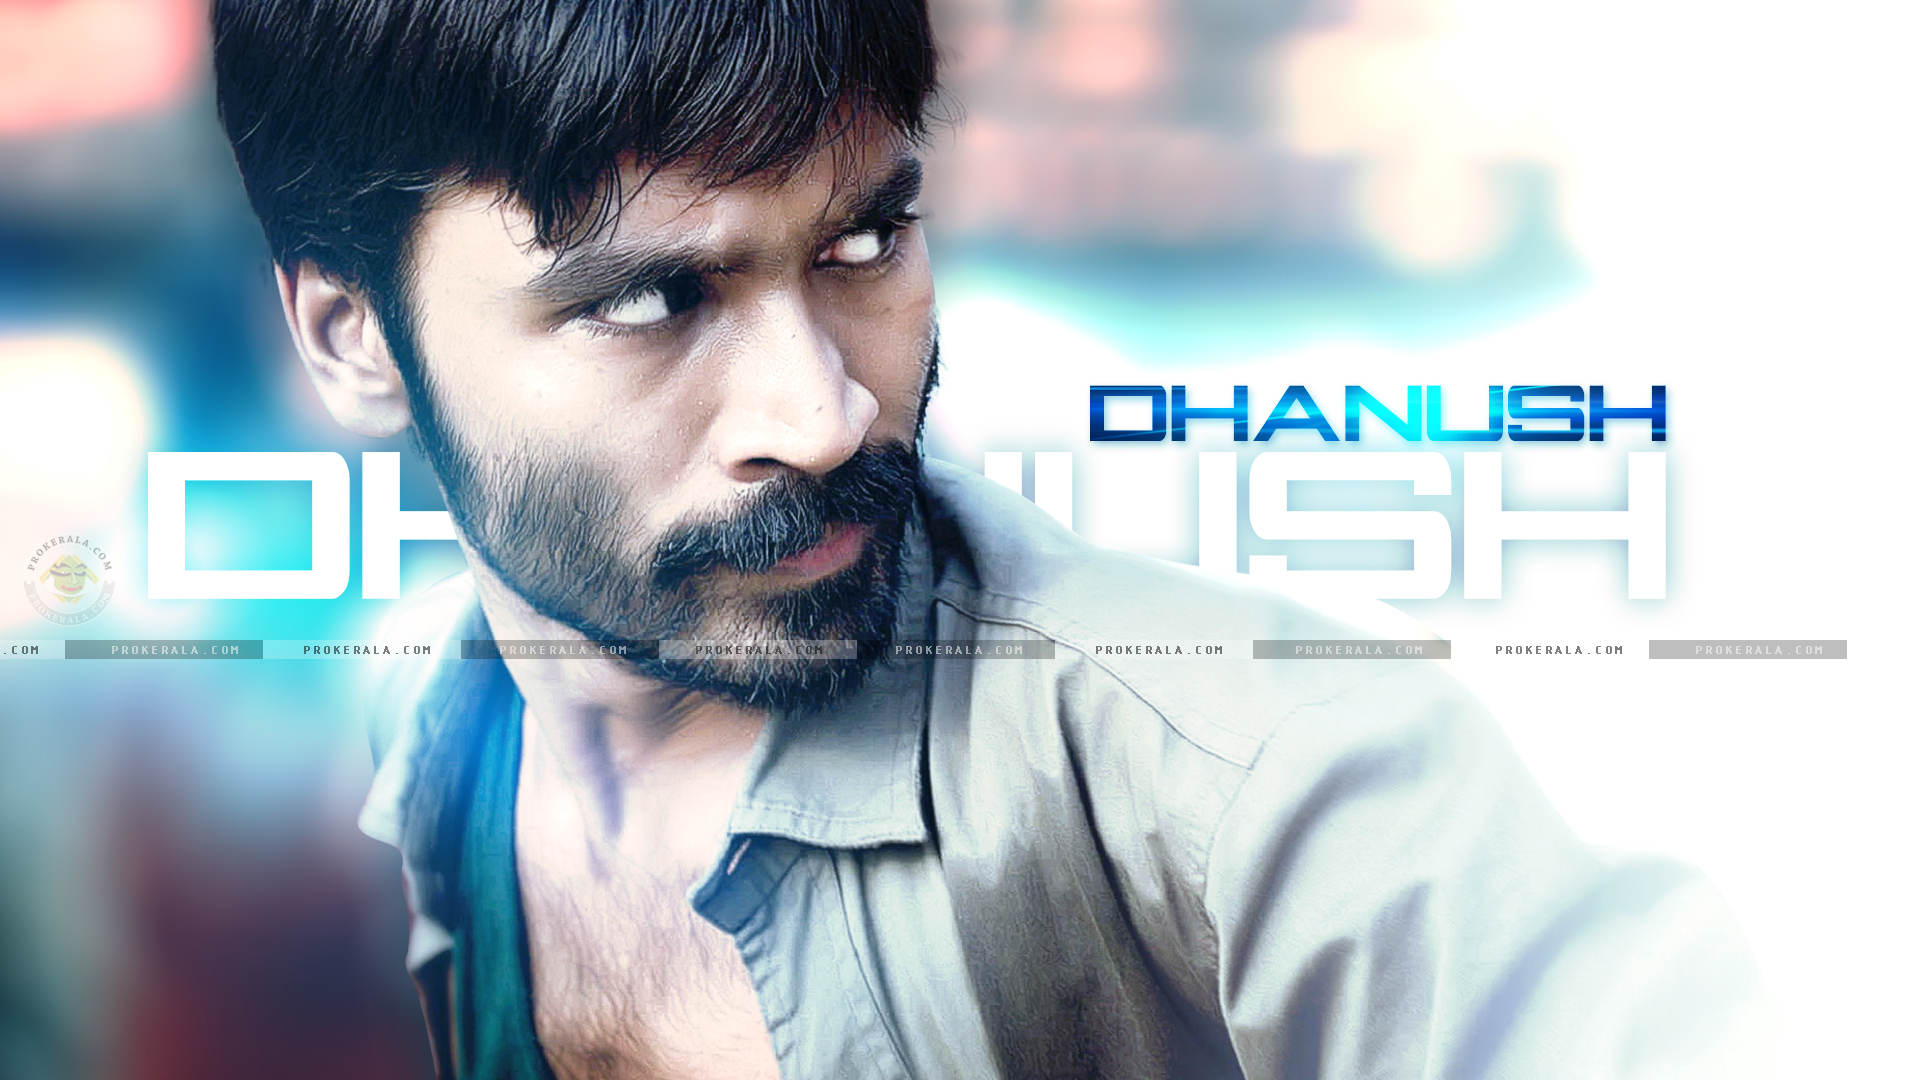 Dhanush Images, Photos, Latest HD Wallpapers Free Download